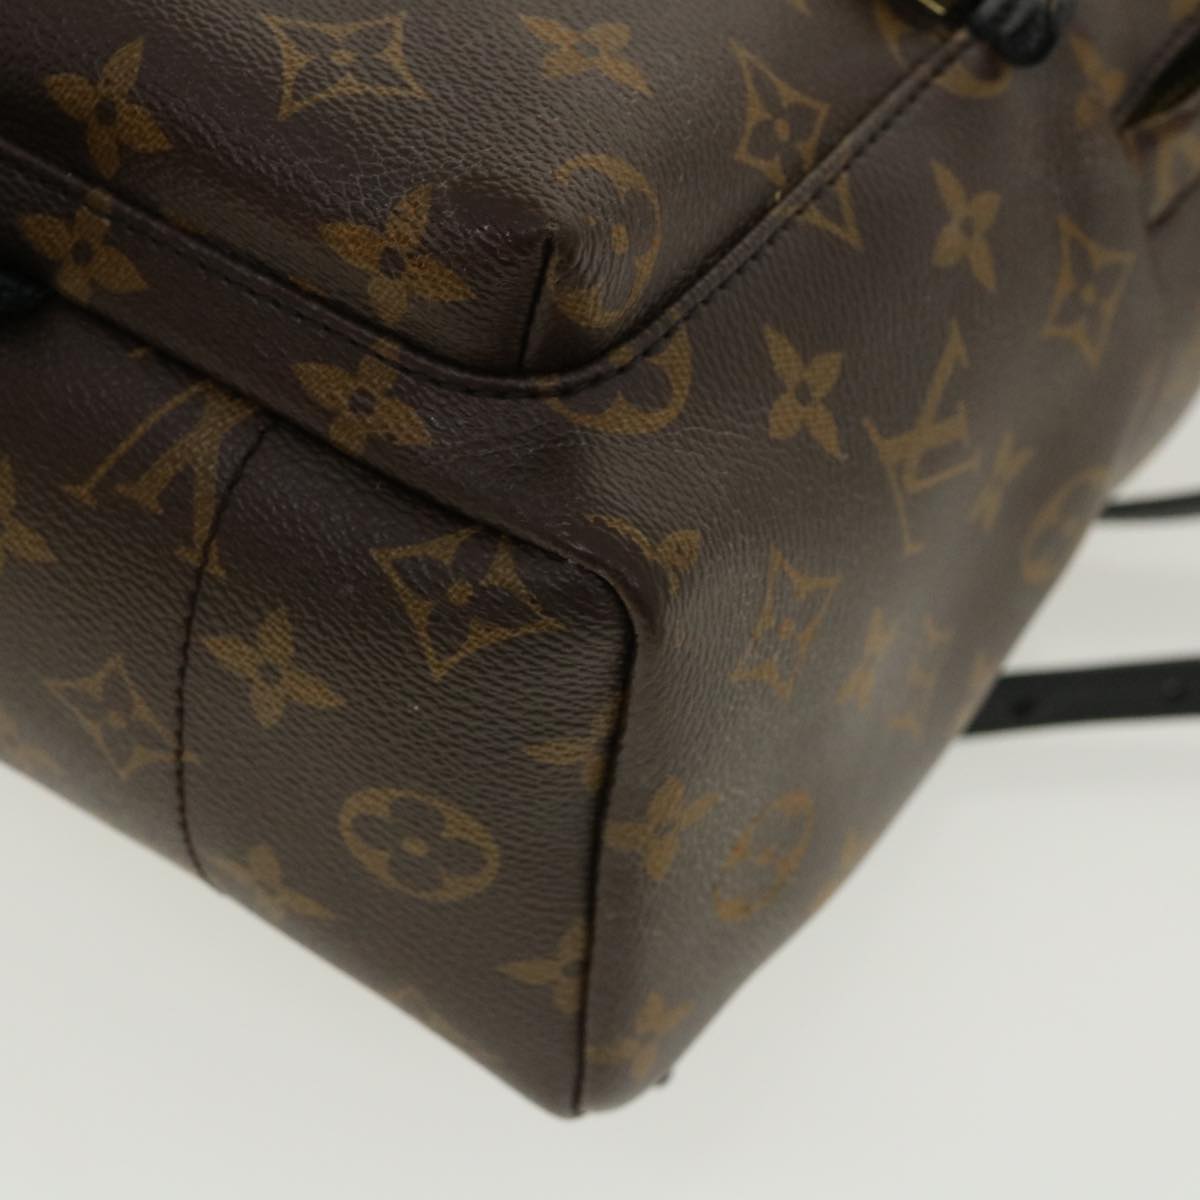 LOUIS VUITTON Monogram Palm Springs PM Backpack M41560 LV Auth bs2081